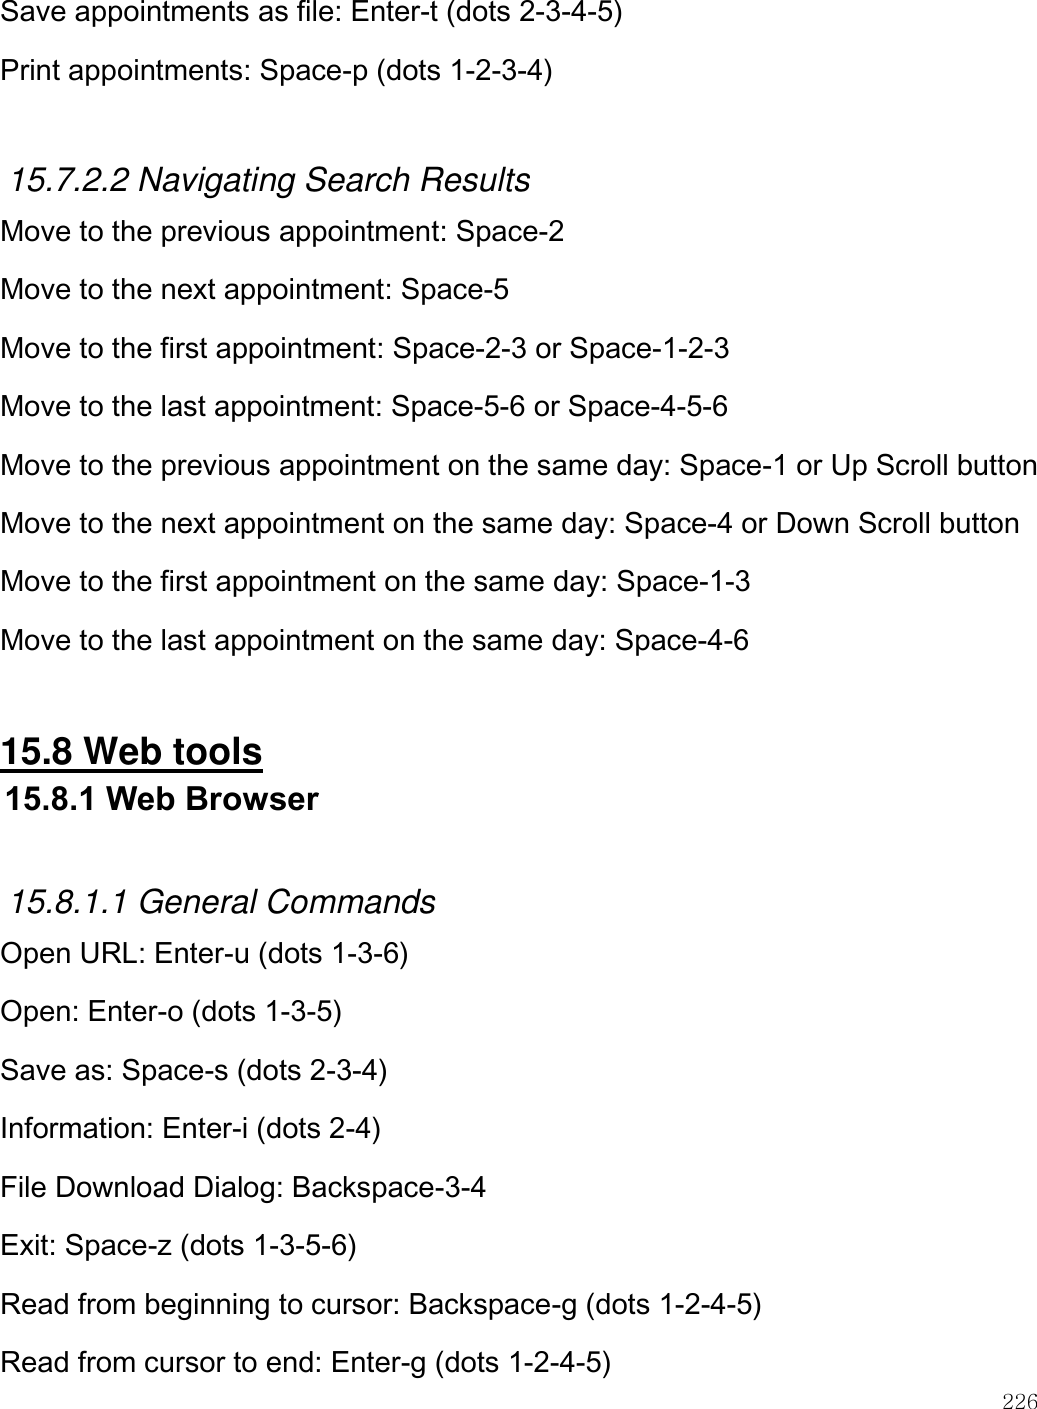    226  Save appointments as file: Enter-t (dots 2-3-4-5) Print appointments: Space-p (dots 1-2-3-4)  15.7.2.2 Navigating Search Results Move to the previous appointment: Space-2 Move to the next appointment: Space-5 Move to the first appointment: Space-2-3 or Space-1-2-3 Move to the last appointment: Space-5-6 or Space-4-5-6 Move to the previous appointment on the same day: Space-1 or Up Scroll button Move to the next appointment on the same day: Space-4 or Down Scroll button Move to the first appointment on the same day: Space-1-3 Move to the last appointment on the same day: Space-4-6  15.8 Web tools 15.8.1 Web Browser  15.8.1.1 General Commands Open URL: Enter-u (dots 1-3-6) Open: Enter-o (dots 1-3-5) Save as: Space-s (dots 2-3-4) Information: Enter-i (dots 2-4) File Download Dialog: Backspace-3-4 Exit: Space-z (dots 1-3-5-6) Read from beginning to cursor: Backspace-g (dots 1-2-4-5) Read from cursor to end: Enter-g (dots 1-2-4-5) 